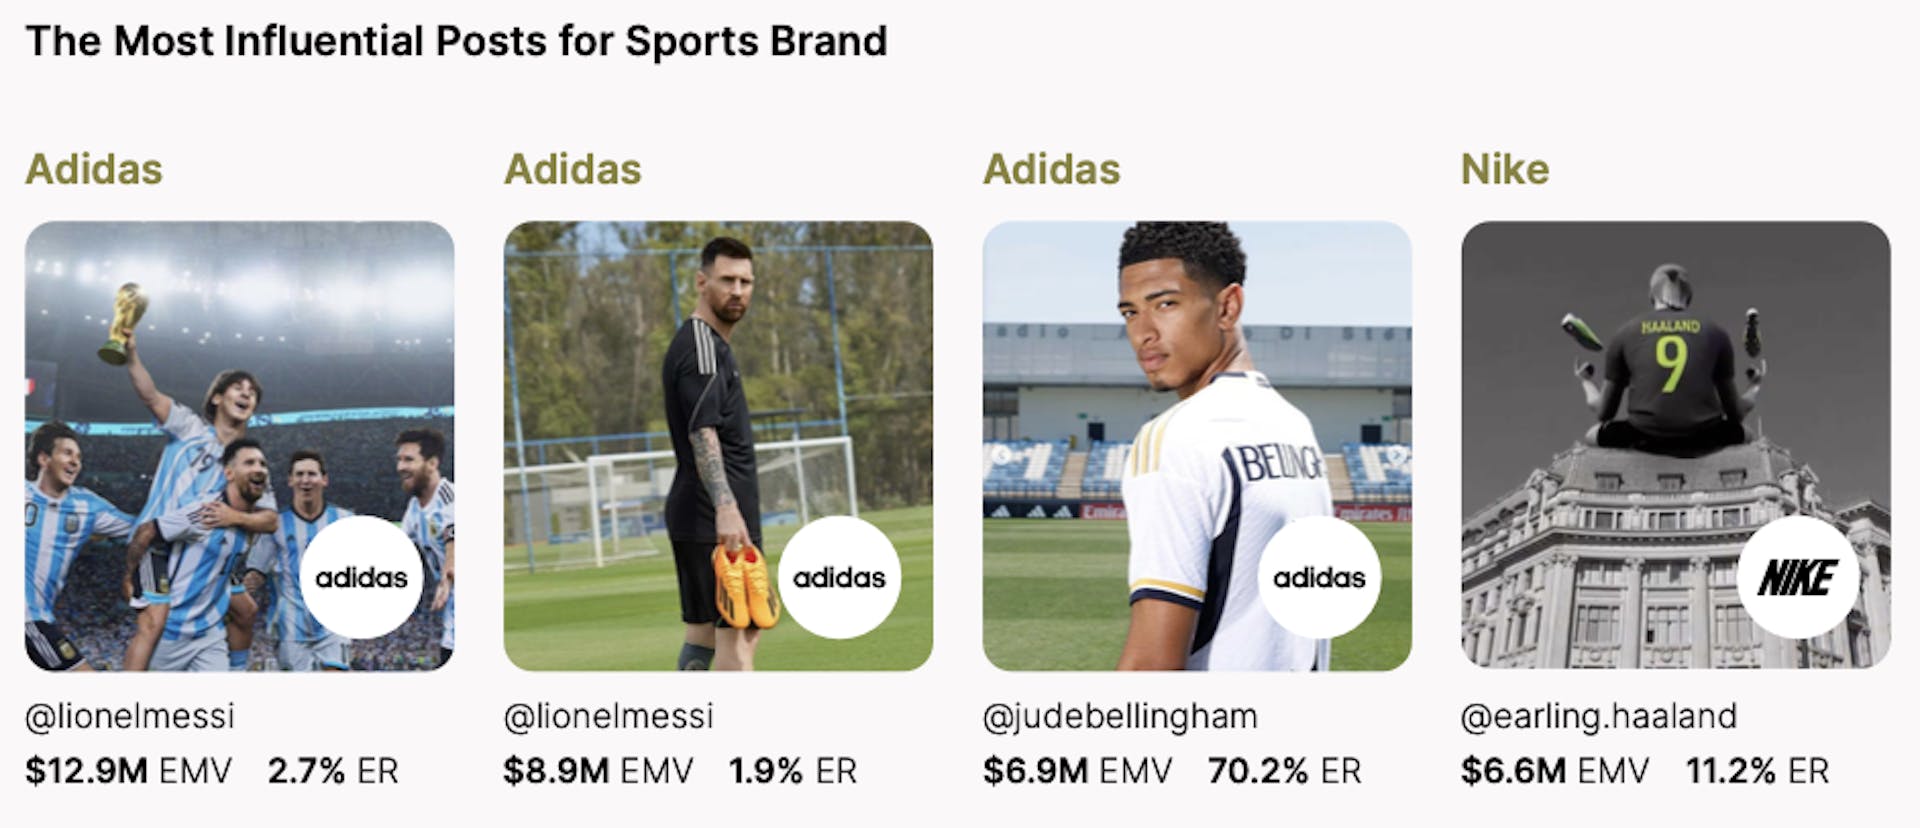 The leading athlete posts for sports brands. 